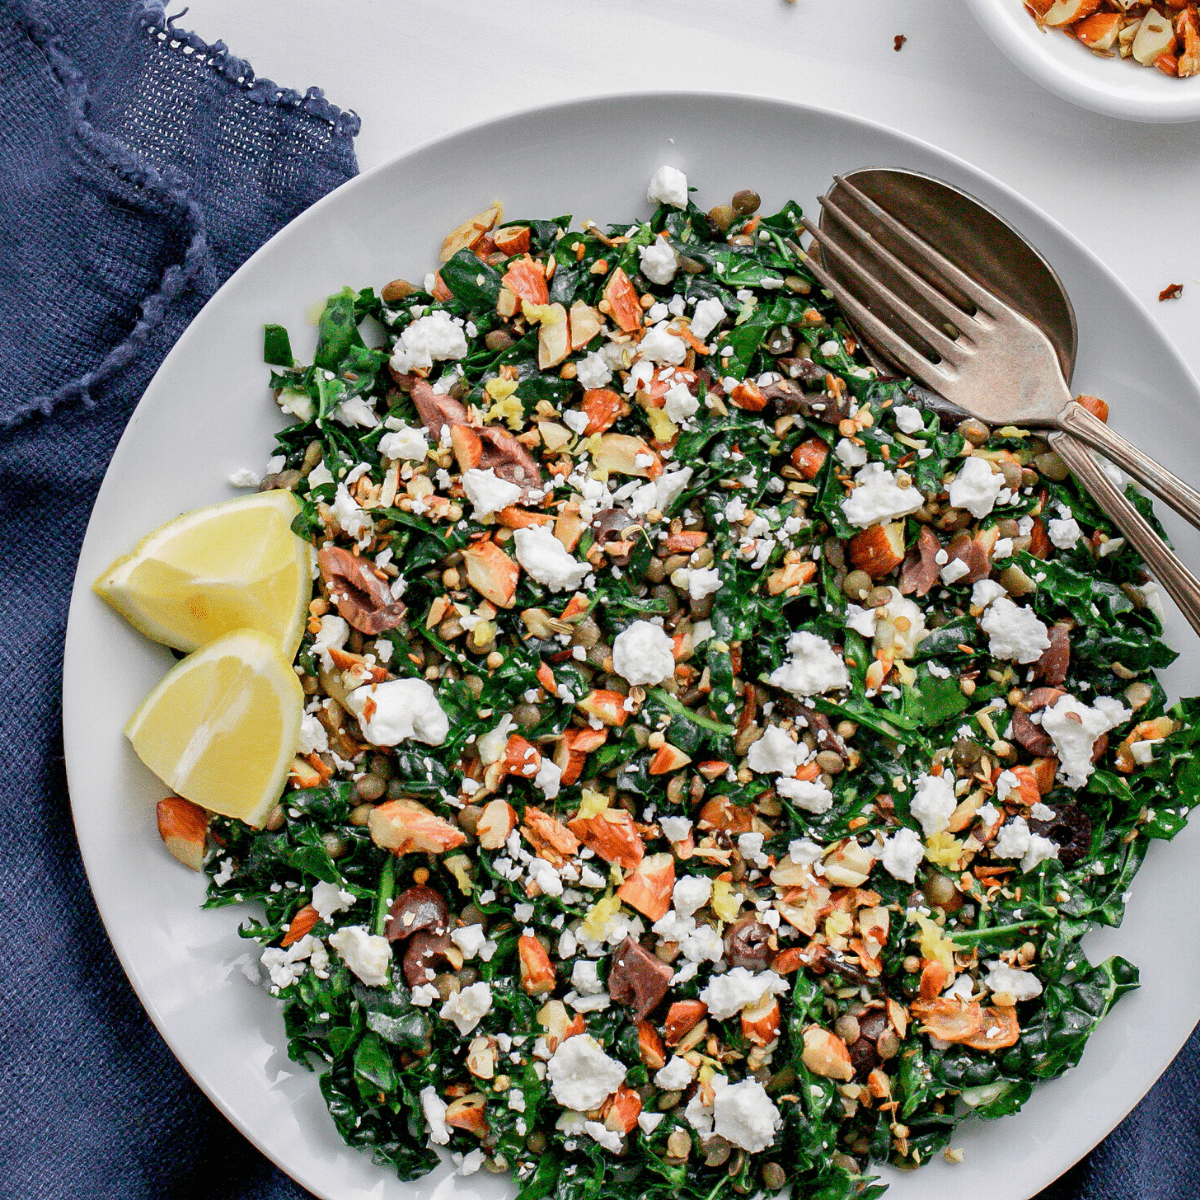 French Lentil Salad with Kale and Feta